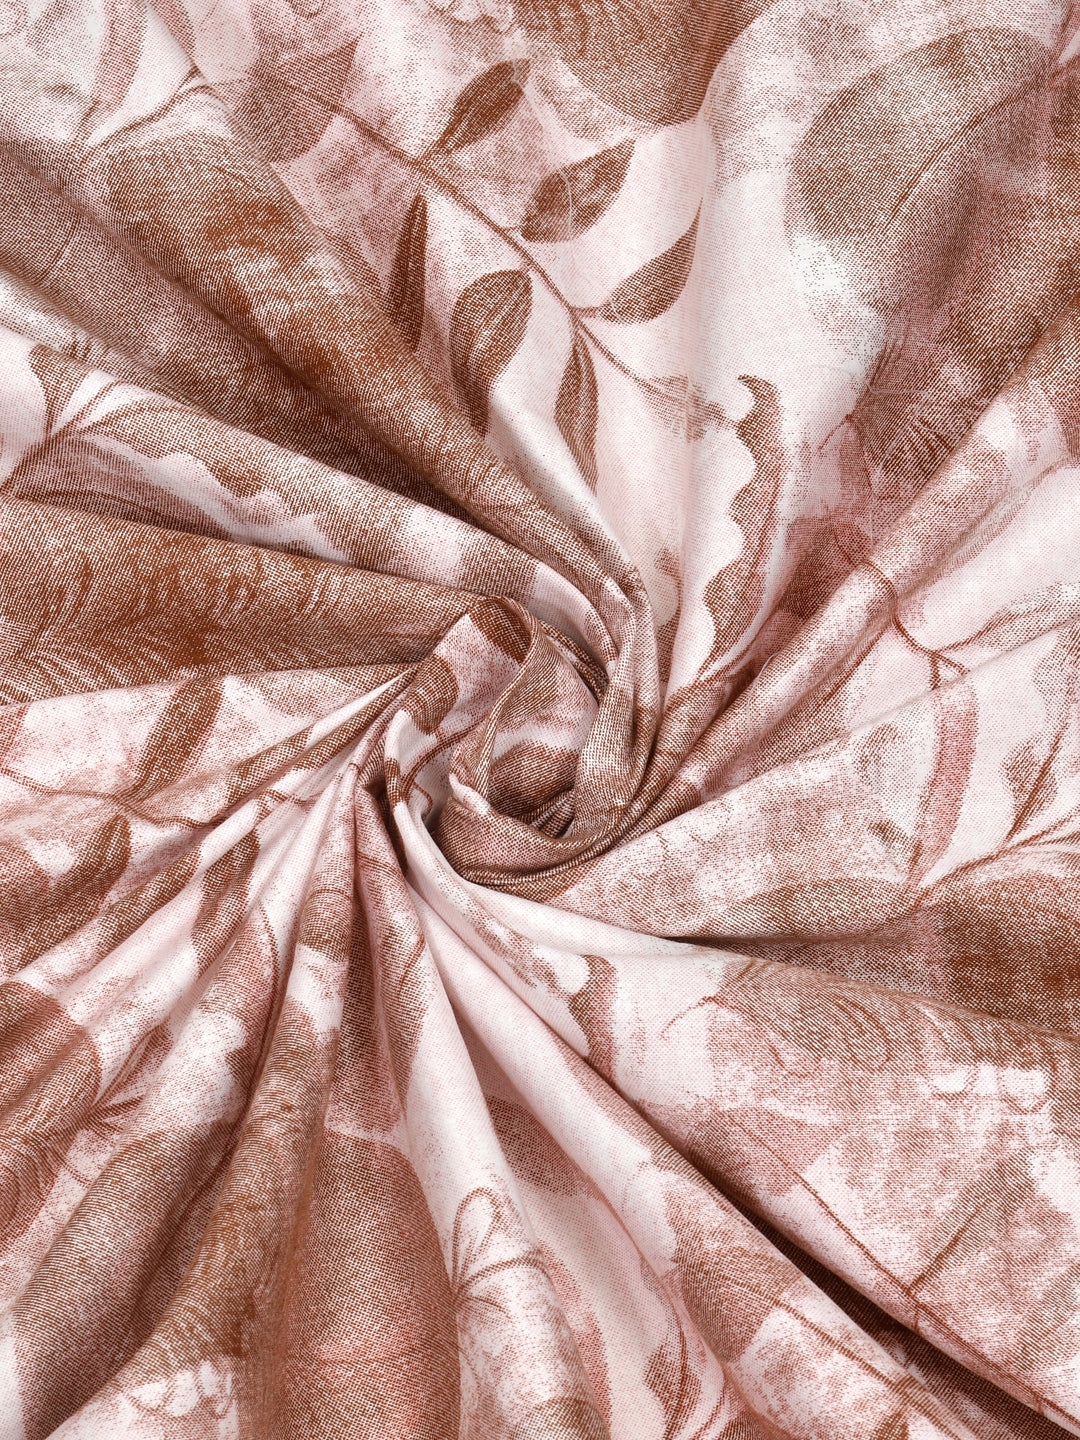 Brown Abstract Print King Size Bed Cotton Linen